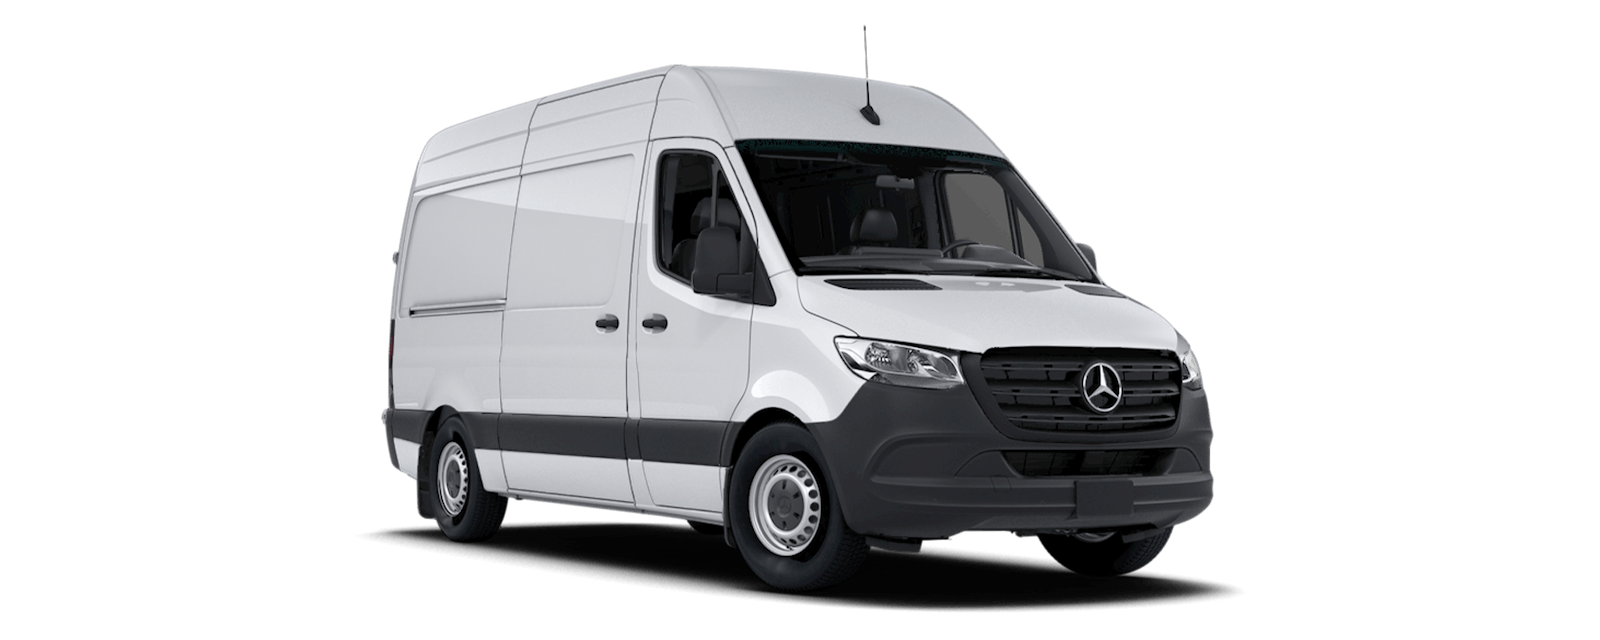 2022 Thor Sanctuary Tranquility Mercedes Sprinter Van 2500 Chassis White Exterior key feature